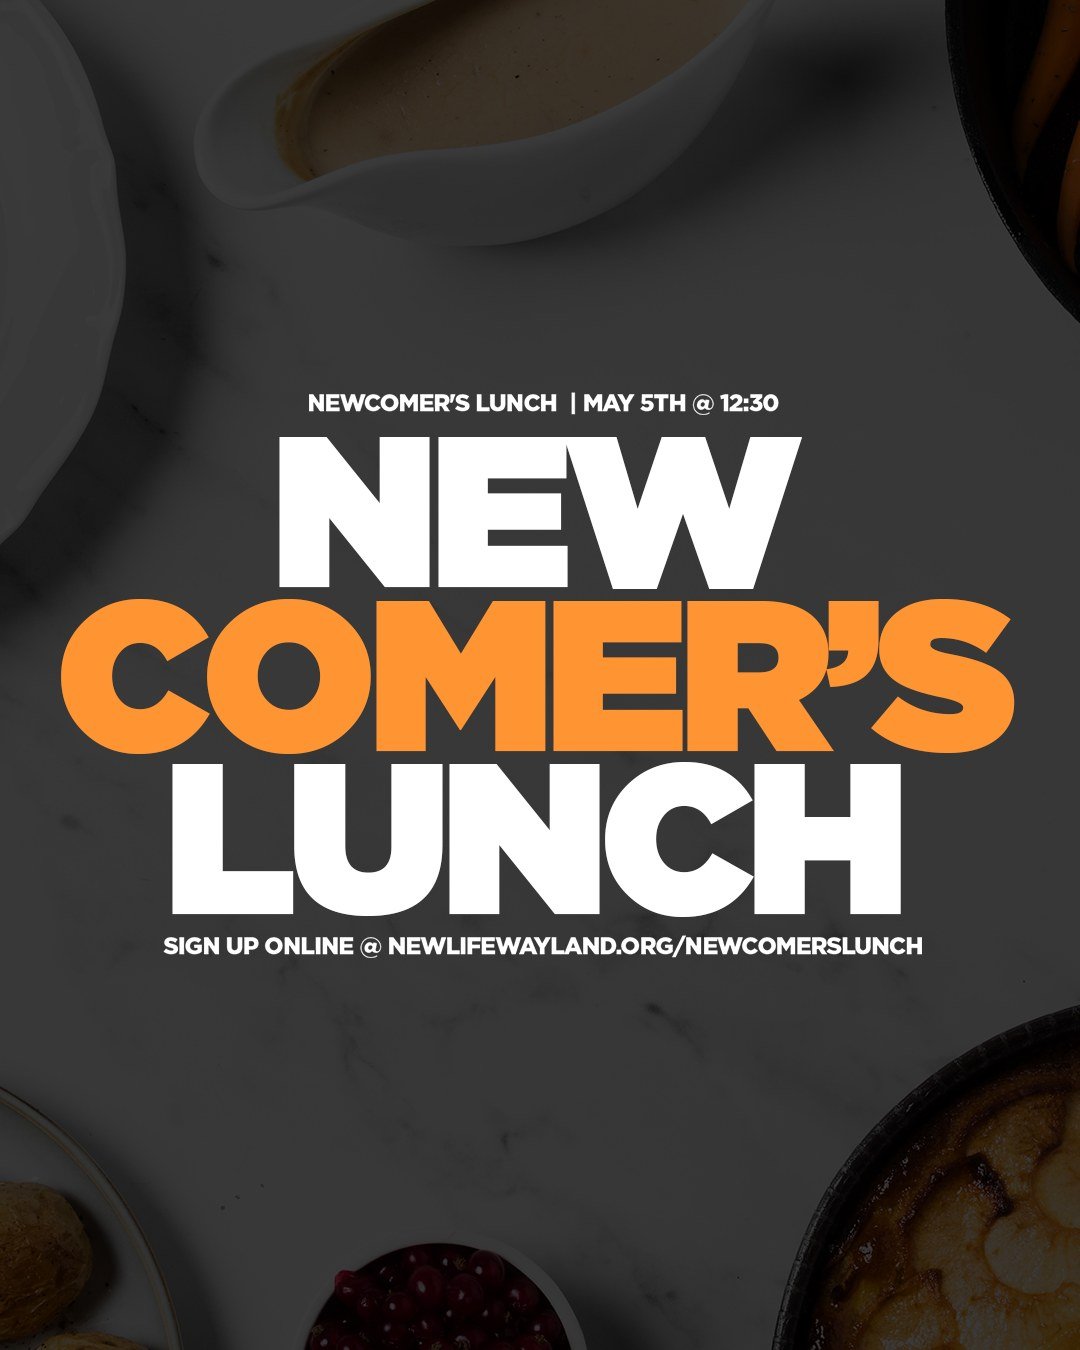 Our next Newcomers Lunch is this coming Sunday immediately following the second service! This is a time where we can get to know you and your family as a staff and where you can ask any questions you may have about NewLife! We'd love to see you there